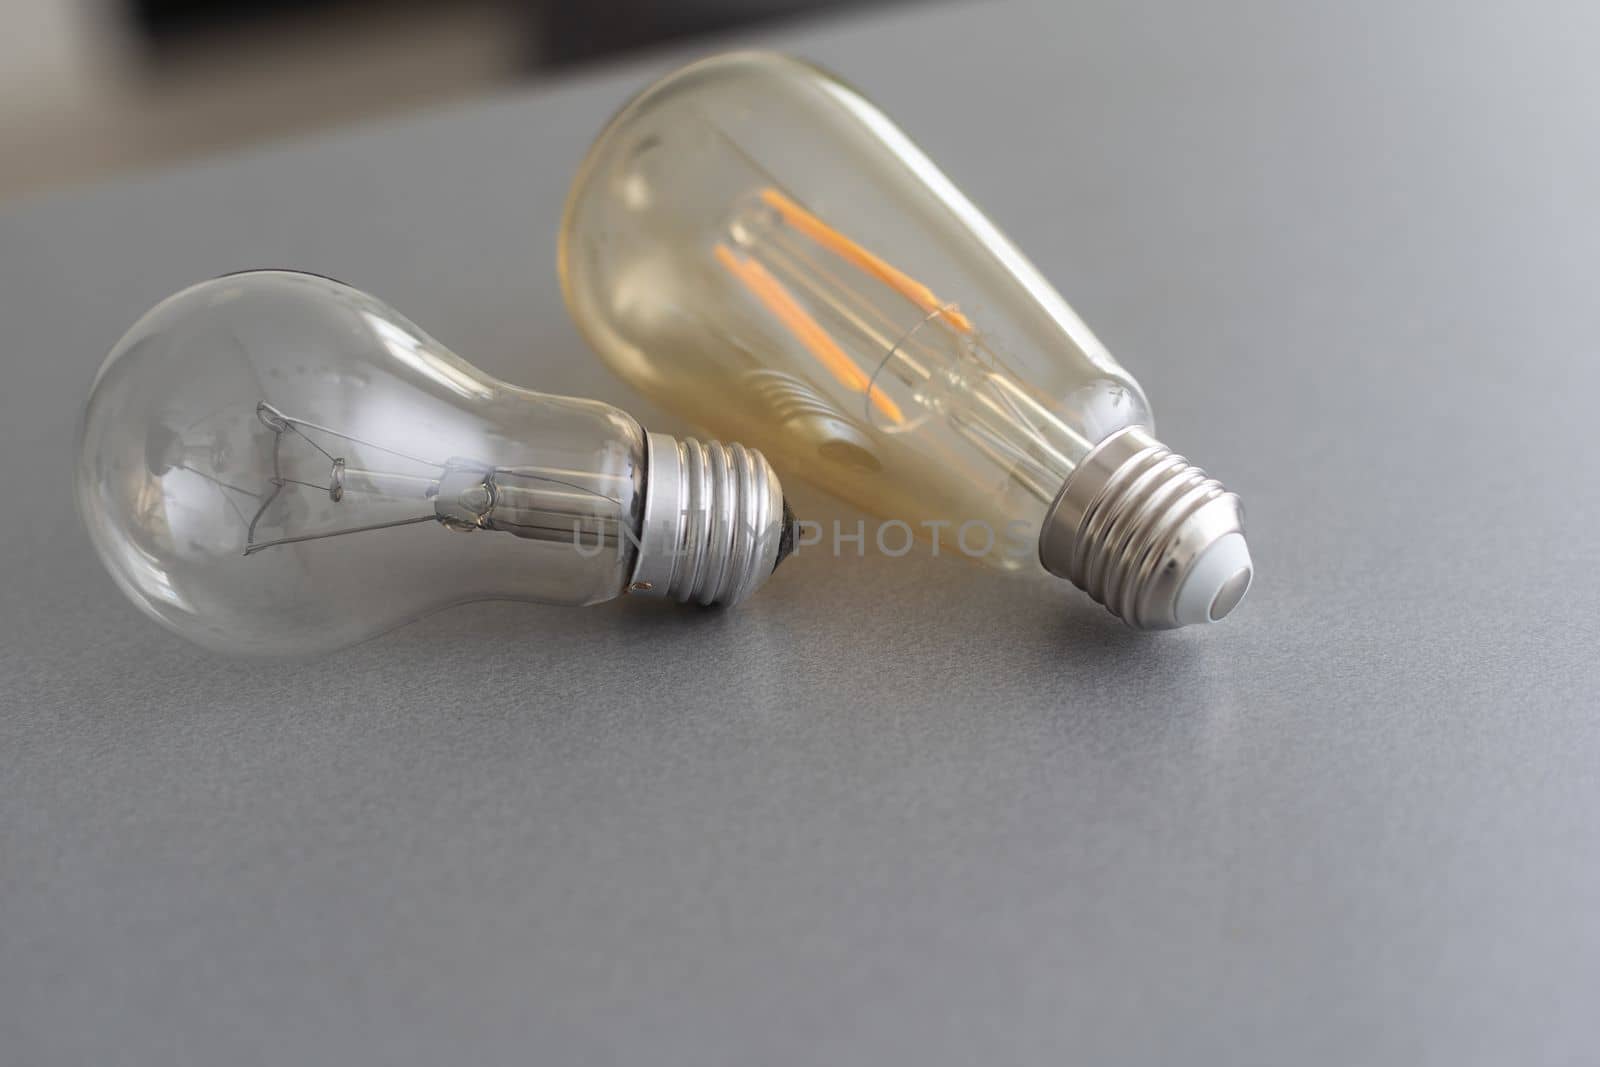 Realistic photo image of light bulbs. isolated bulbs, fluorescent bulbs, orange old generation bulb, Tungsten bulb, and white energy saving bulb.